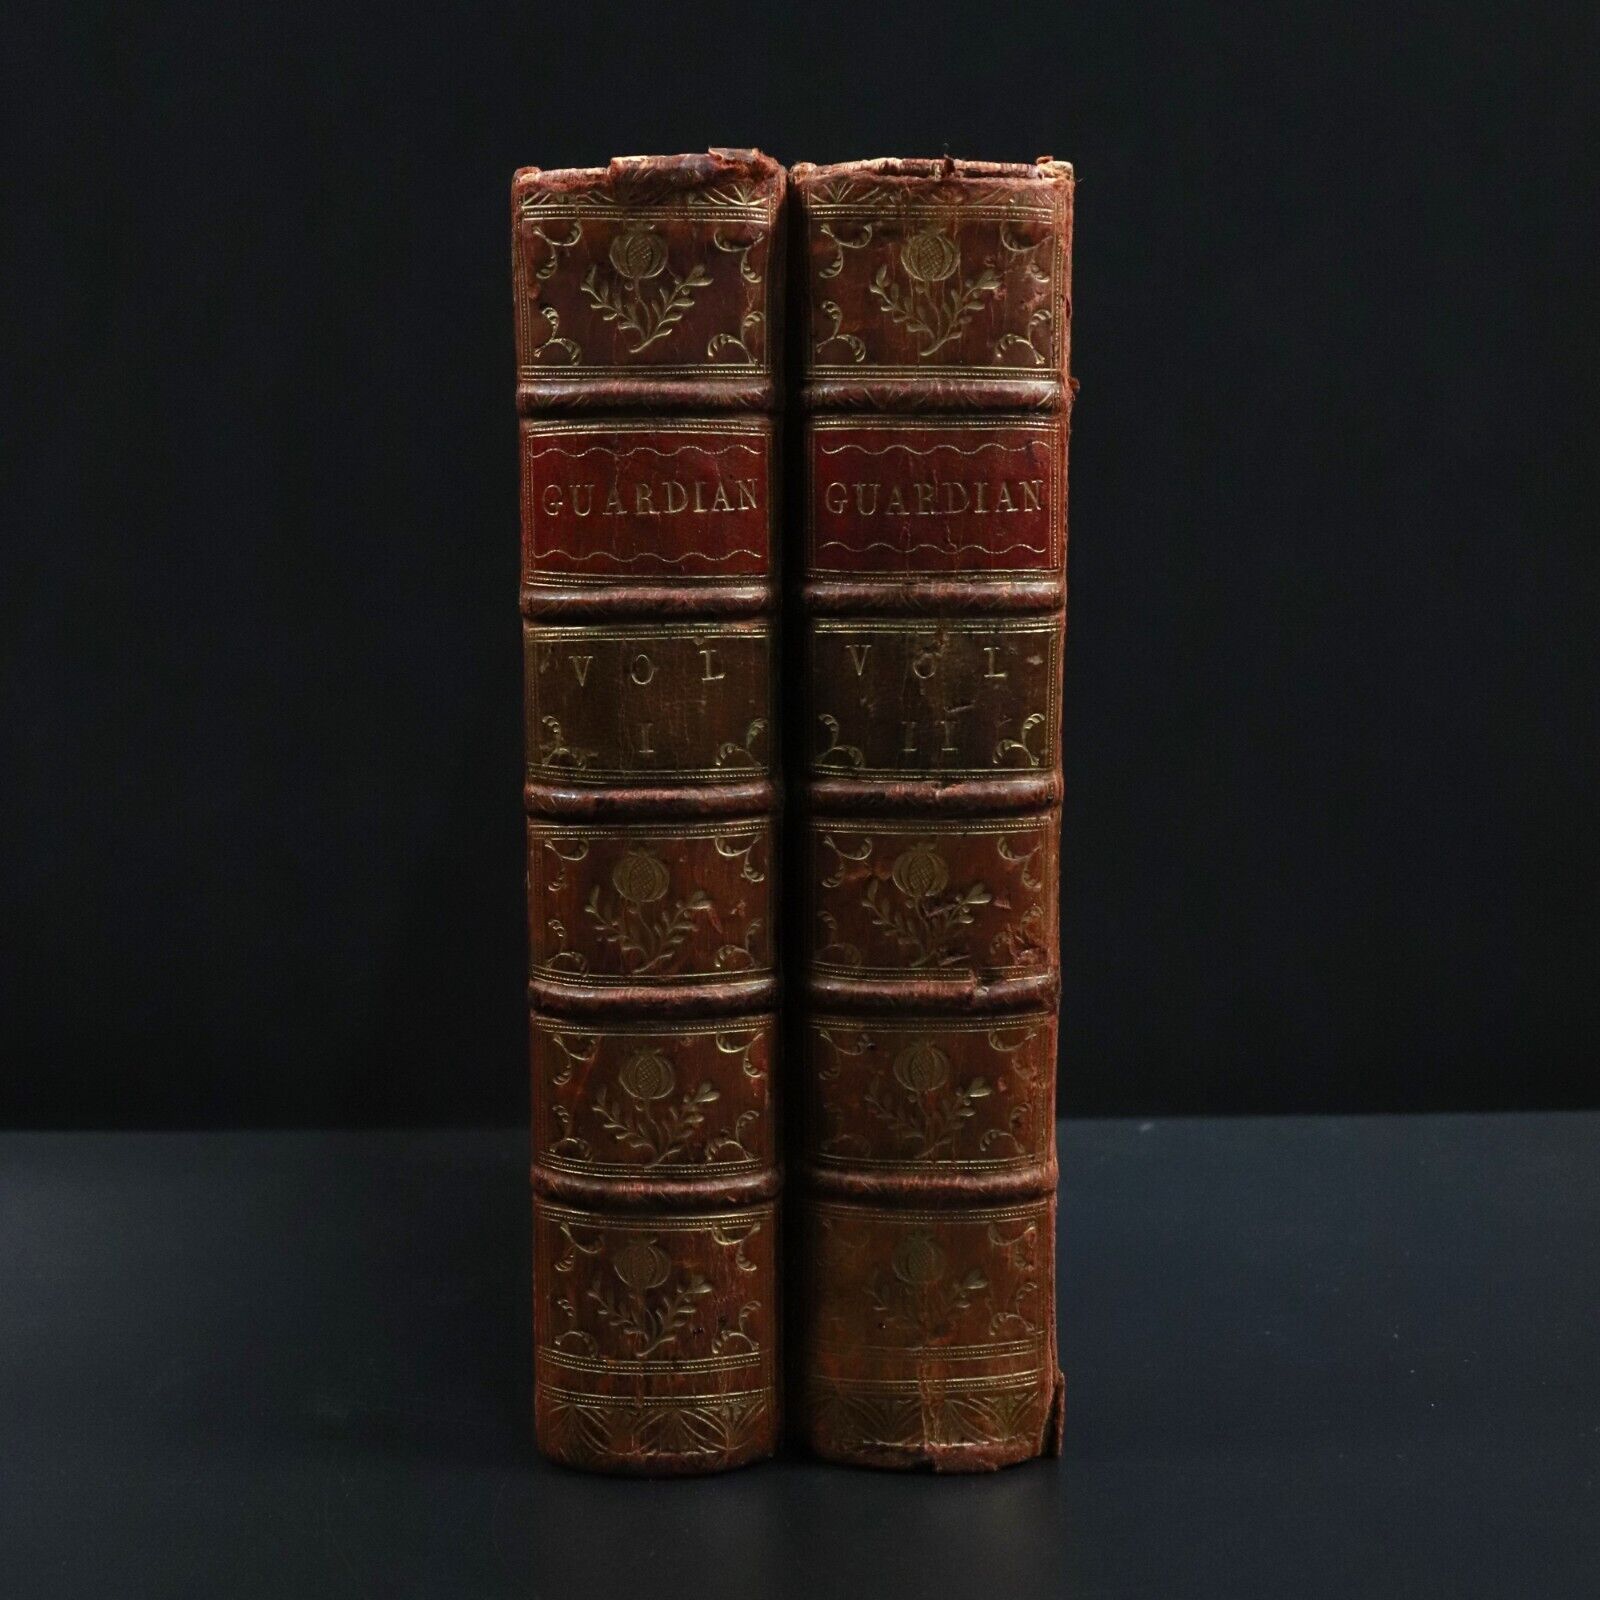 1760 2vol The Guardian by Addison & Steele Antiquarian British History Book Set - 0